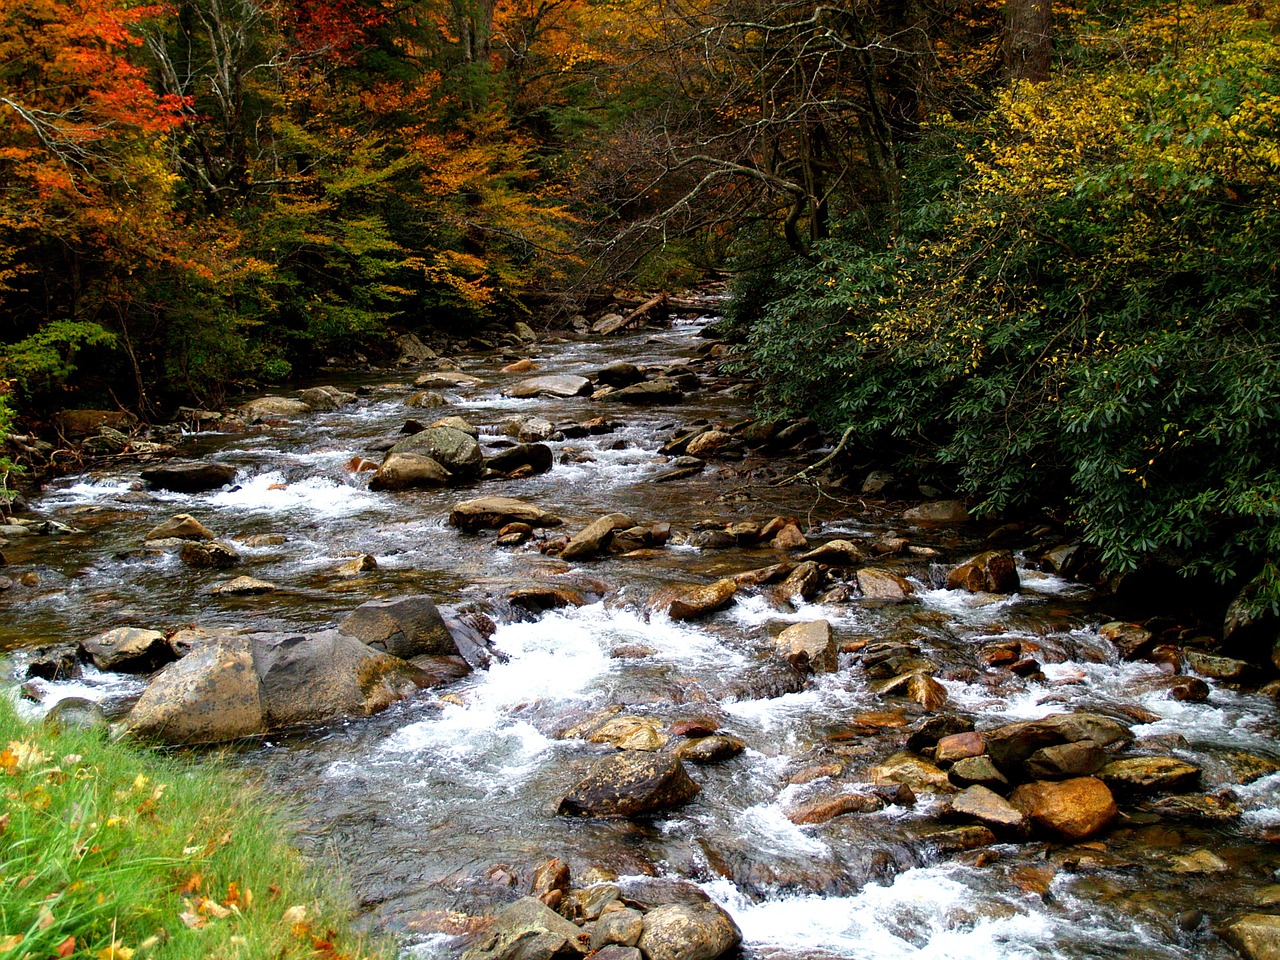 A river in the Smokey Mountains